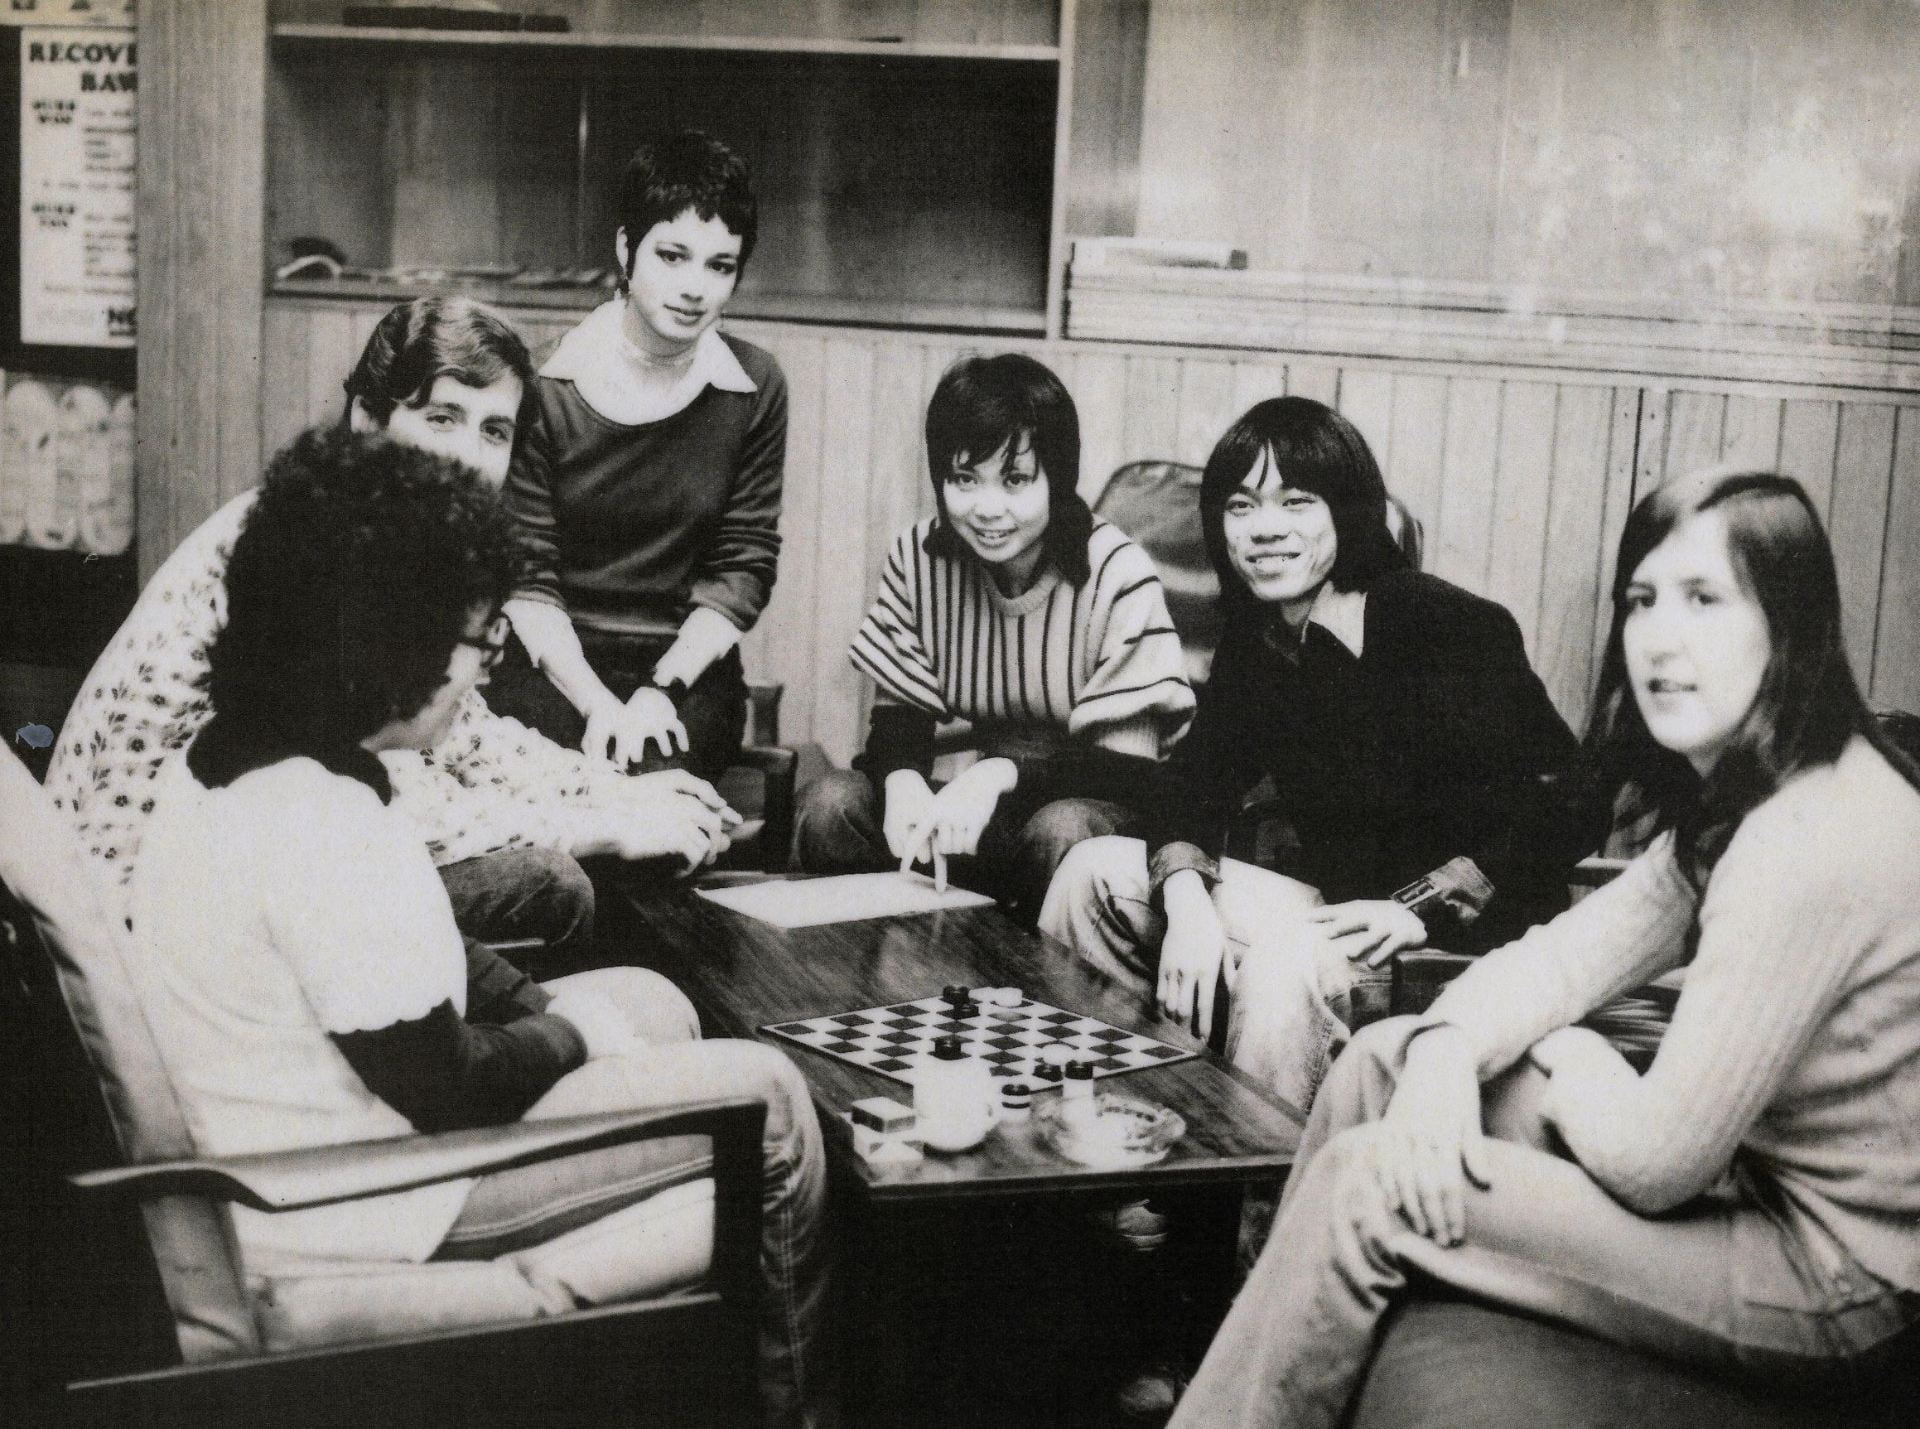 Black and white photograph of a group of male and students gathered around a chess board in the early 1970s.